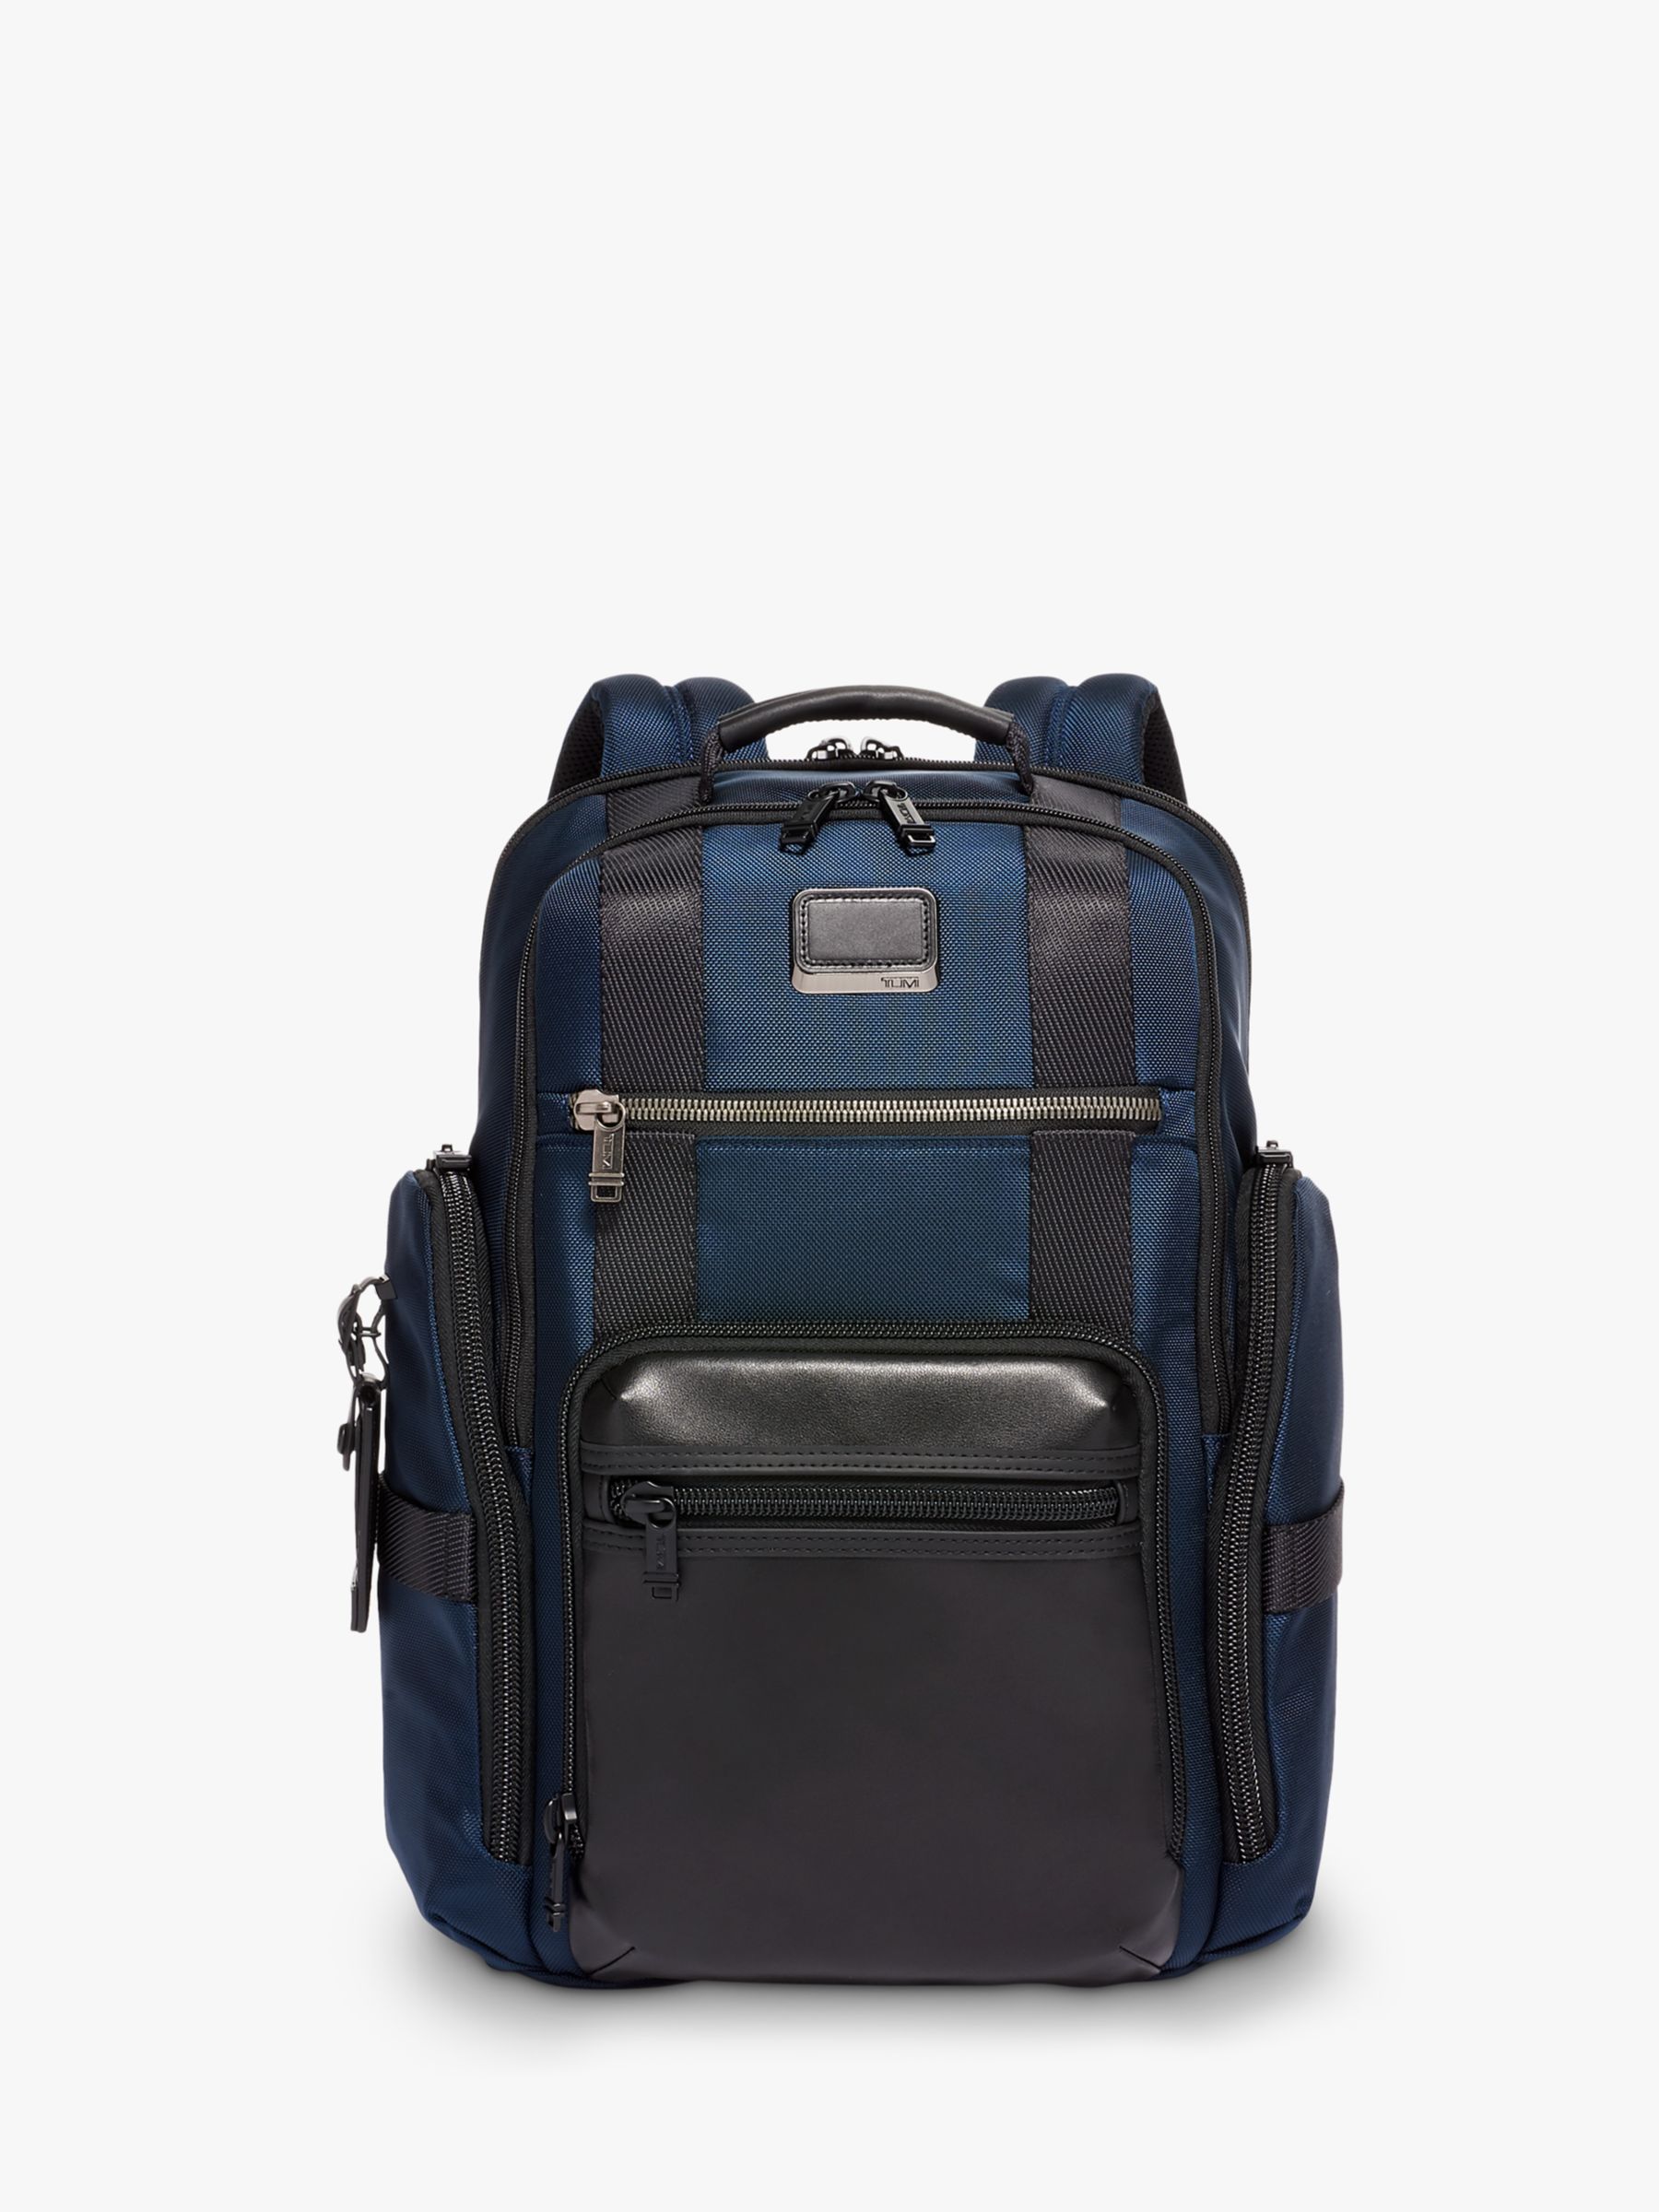 TUMI Alpha Bravo Sheppard Deluxe Backpack at John Lewis & Partners